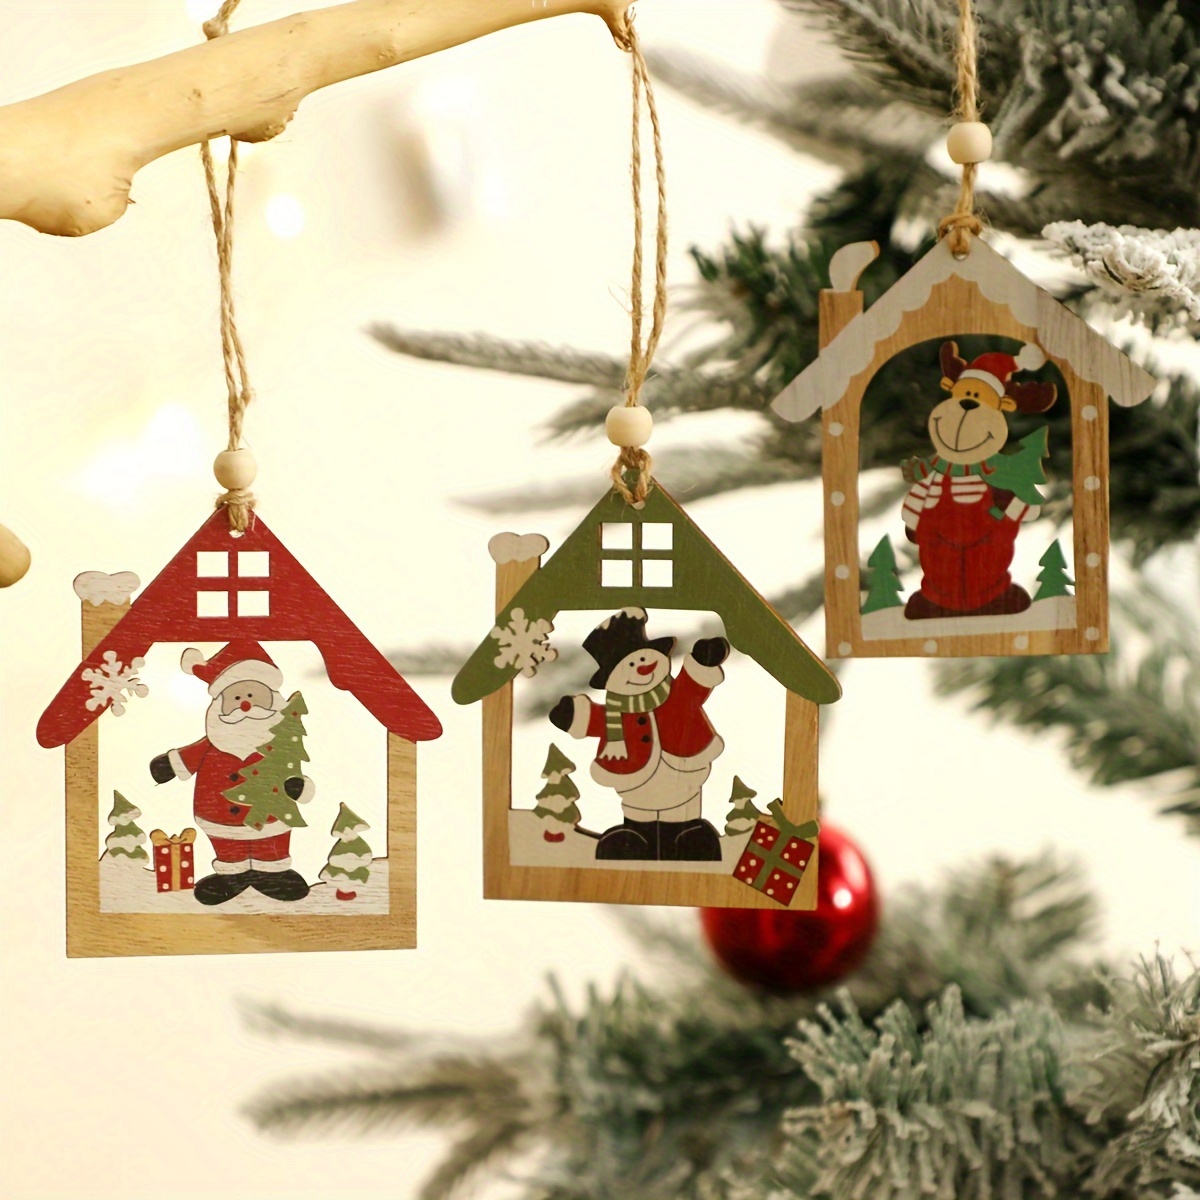 Jlong Christmas Hanging Wooden Ornaments, 1PC Farmhouse Rustic Ornaments  for Christmas Tree Decoration, Wood Christmas Wreath Shaped Ornaments,Gift